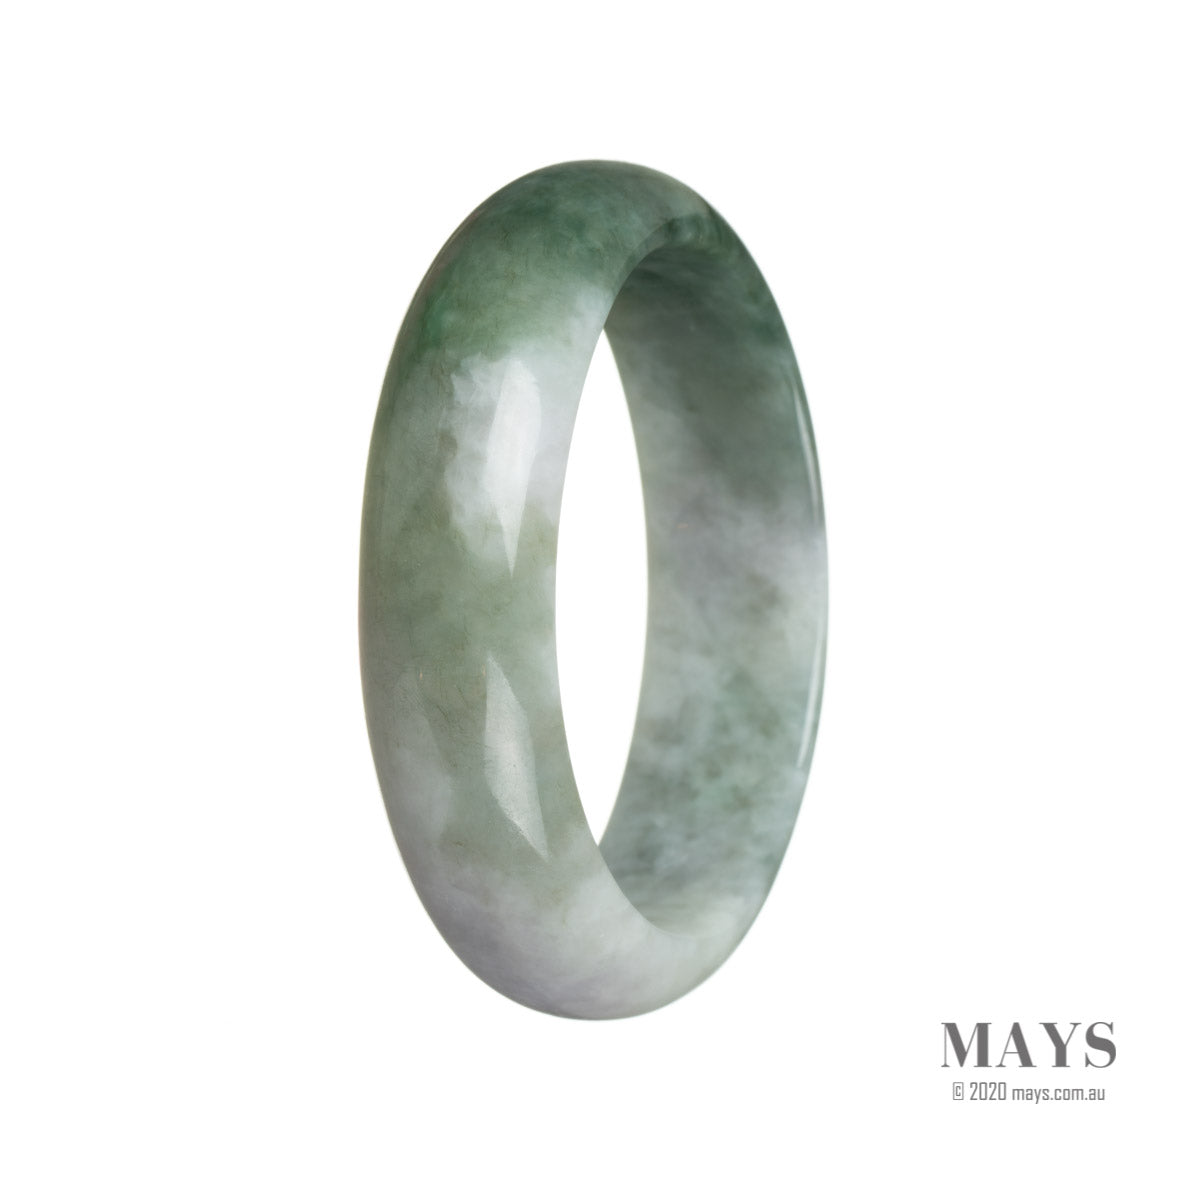 A green and lavender jadeite bracelet in the shape of a half moon, untreated and authentic.